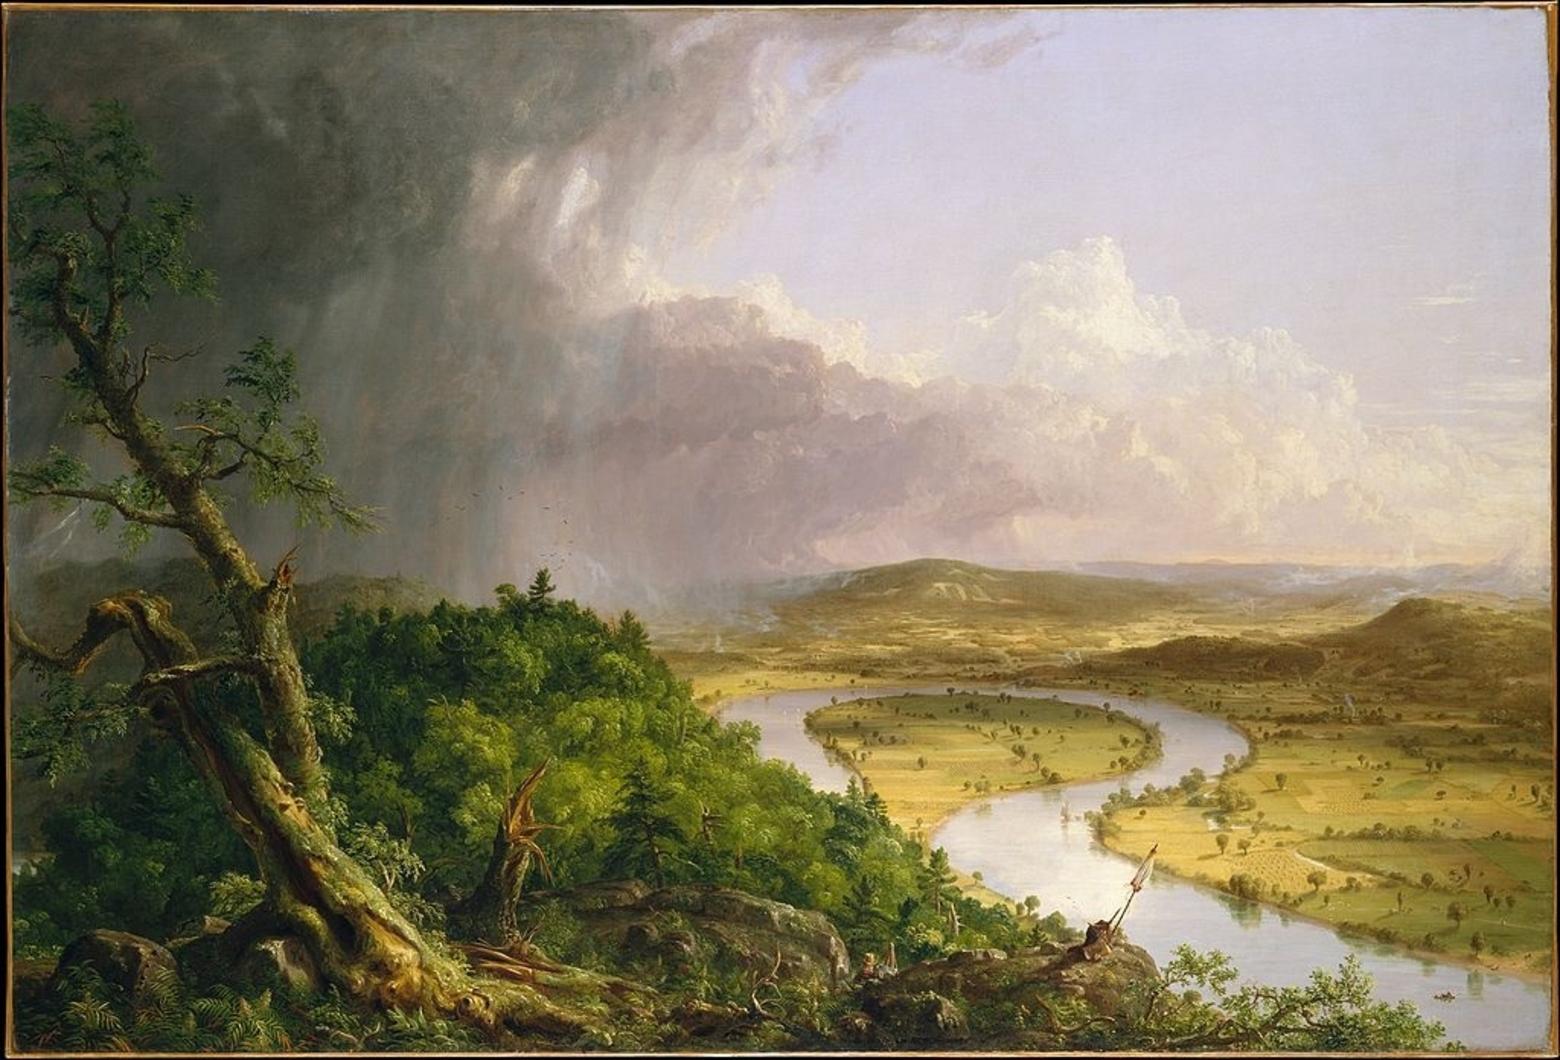 The Oxbow: This 1826 painting by Hudson River school luminary Thomas Cole in the Metropolitan Museum of Art in New York City depicts the view from Mount Holyoke in Northampton, Massachusetts, after a thunderstorm.  Public Domain